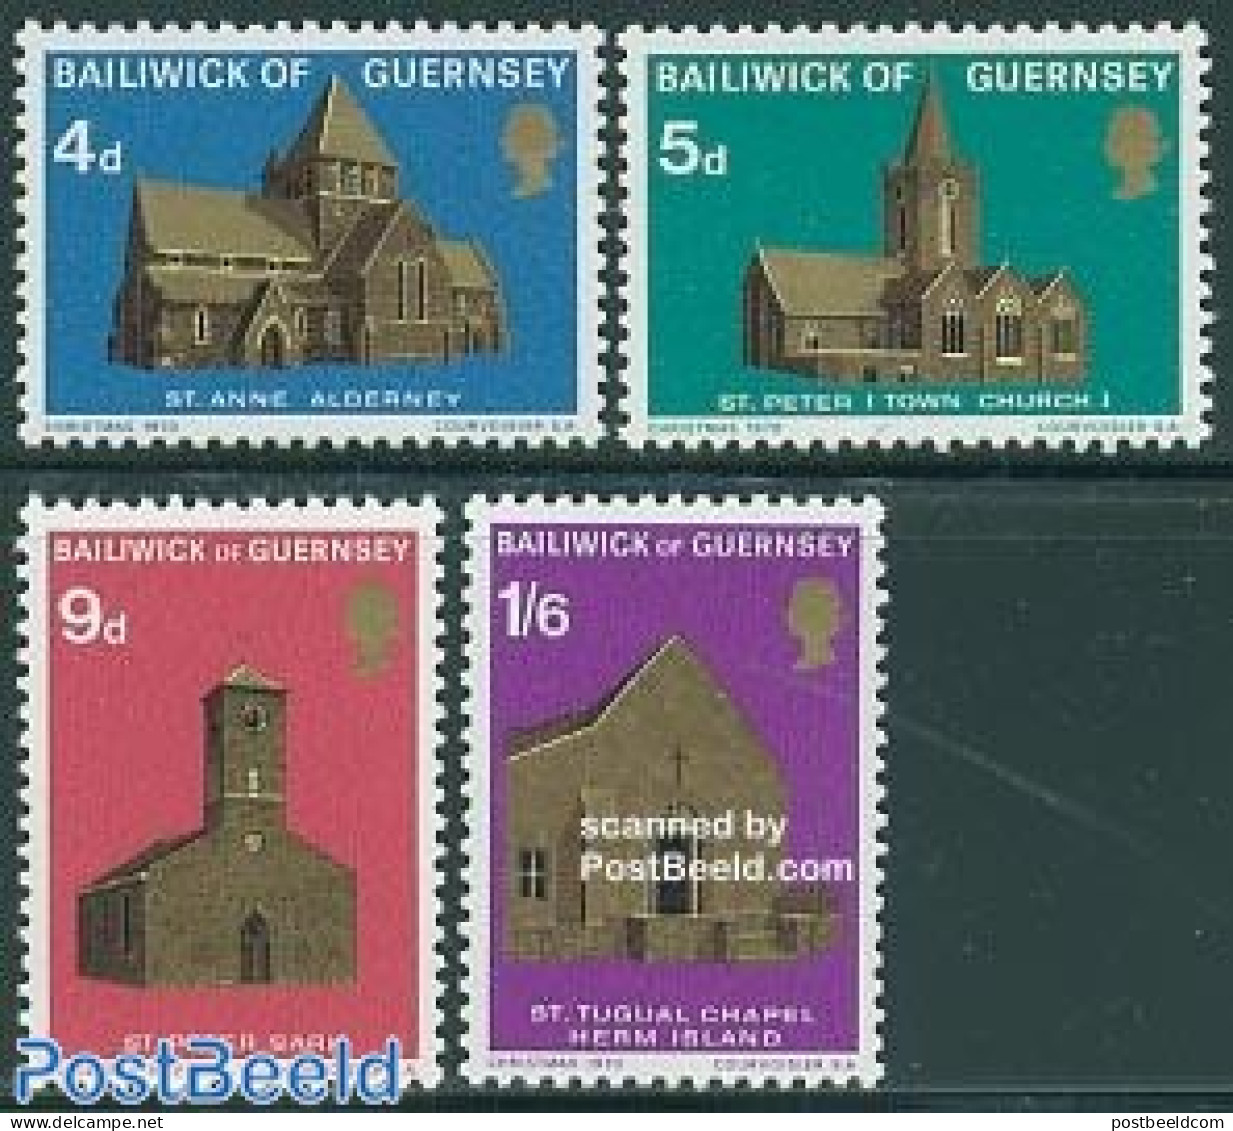 Guernsey 1970 Christmas 4v, Mint NH, Religion - Christmas - Churches, Temples, Mosques, Synagogues - Kerstmis